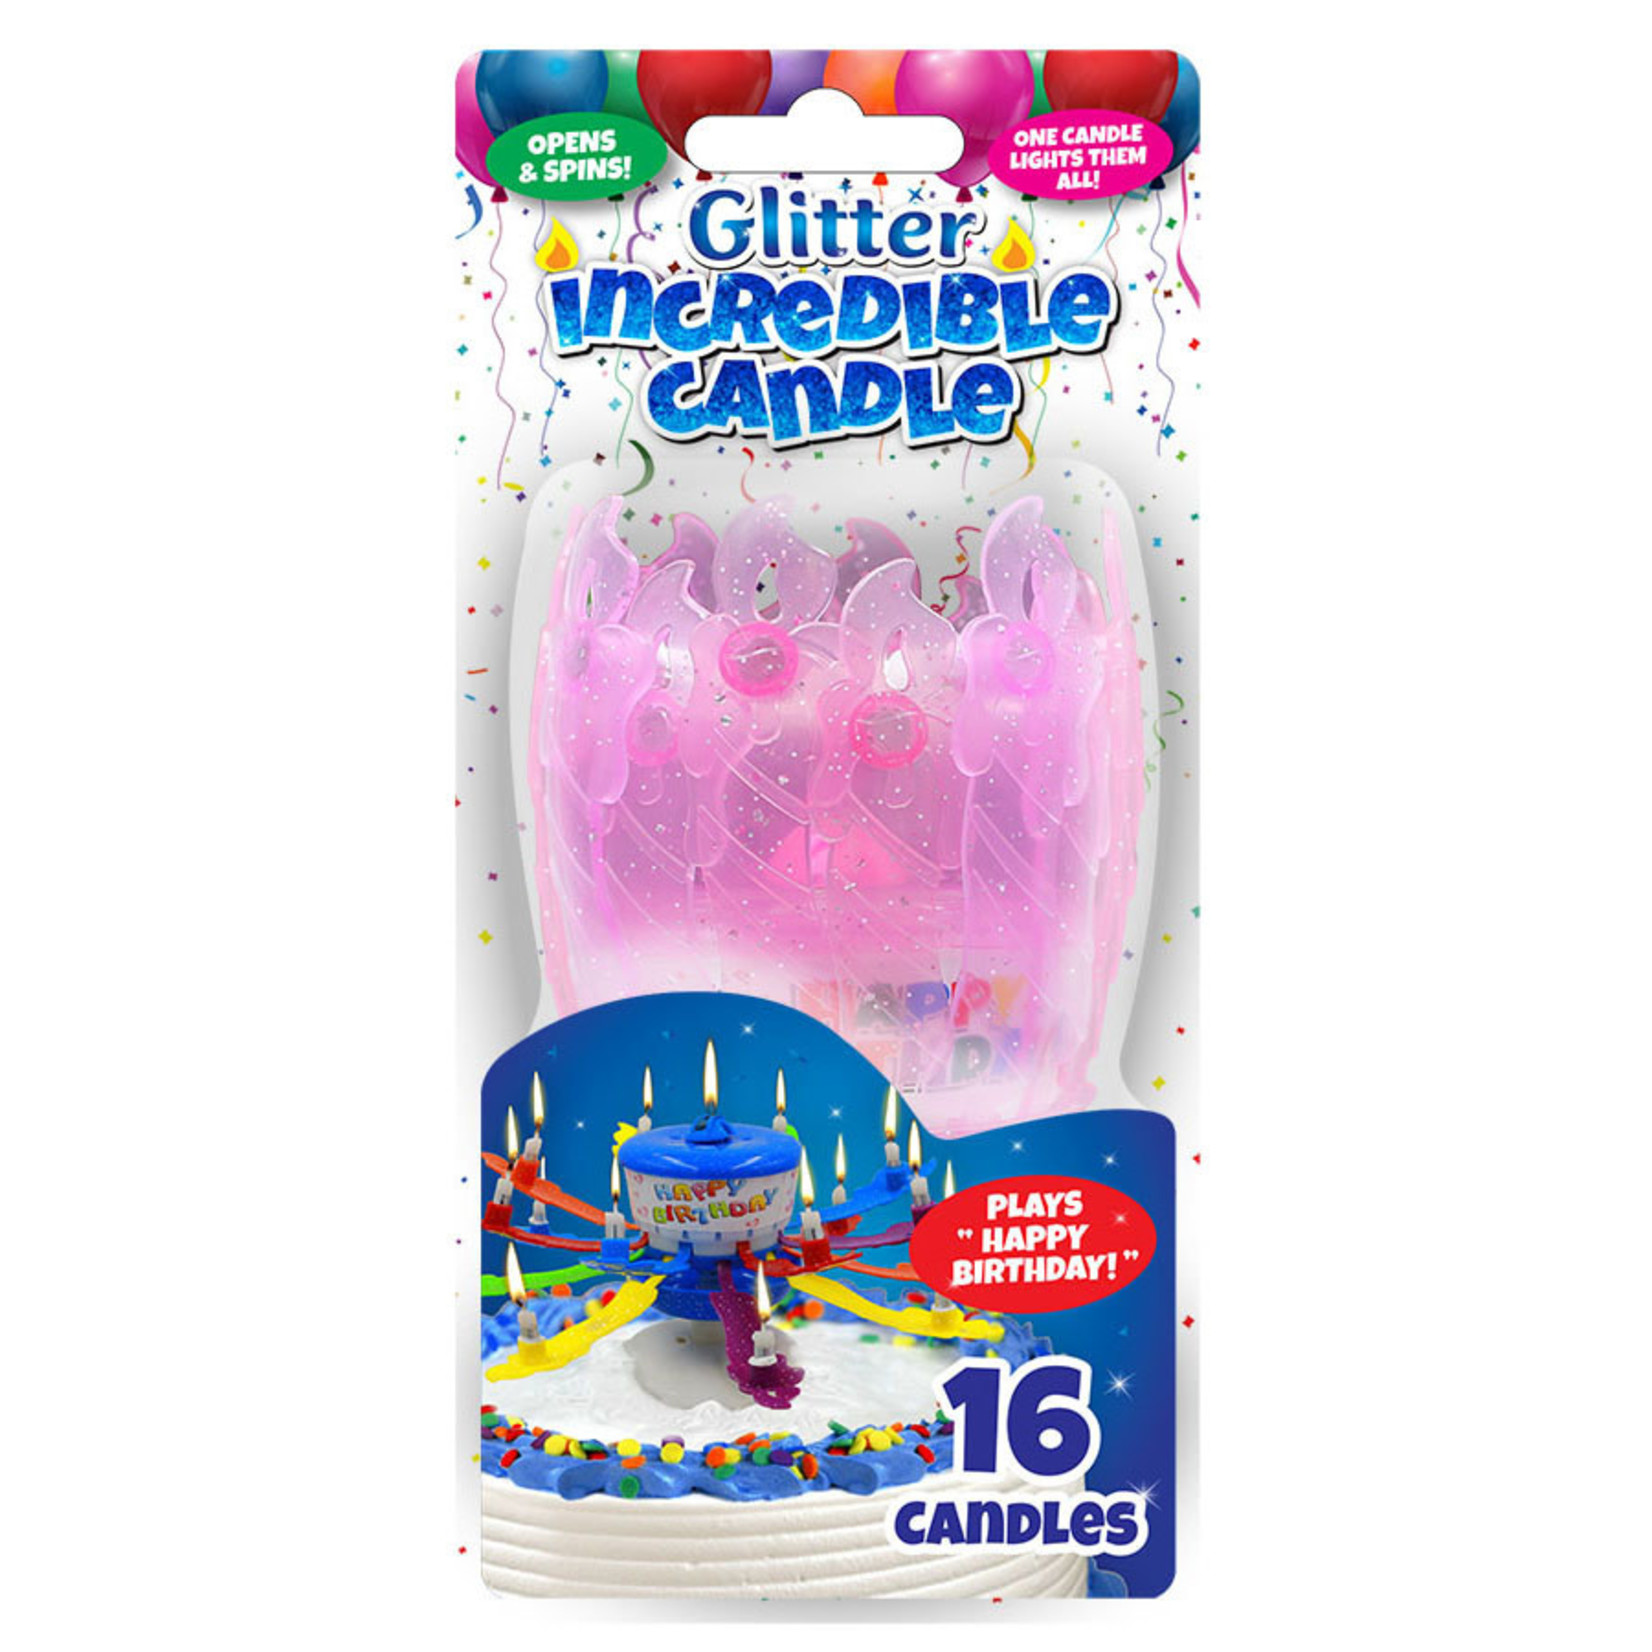 Just For Laughs Glitter Incredible Candles that Spin!